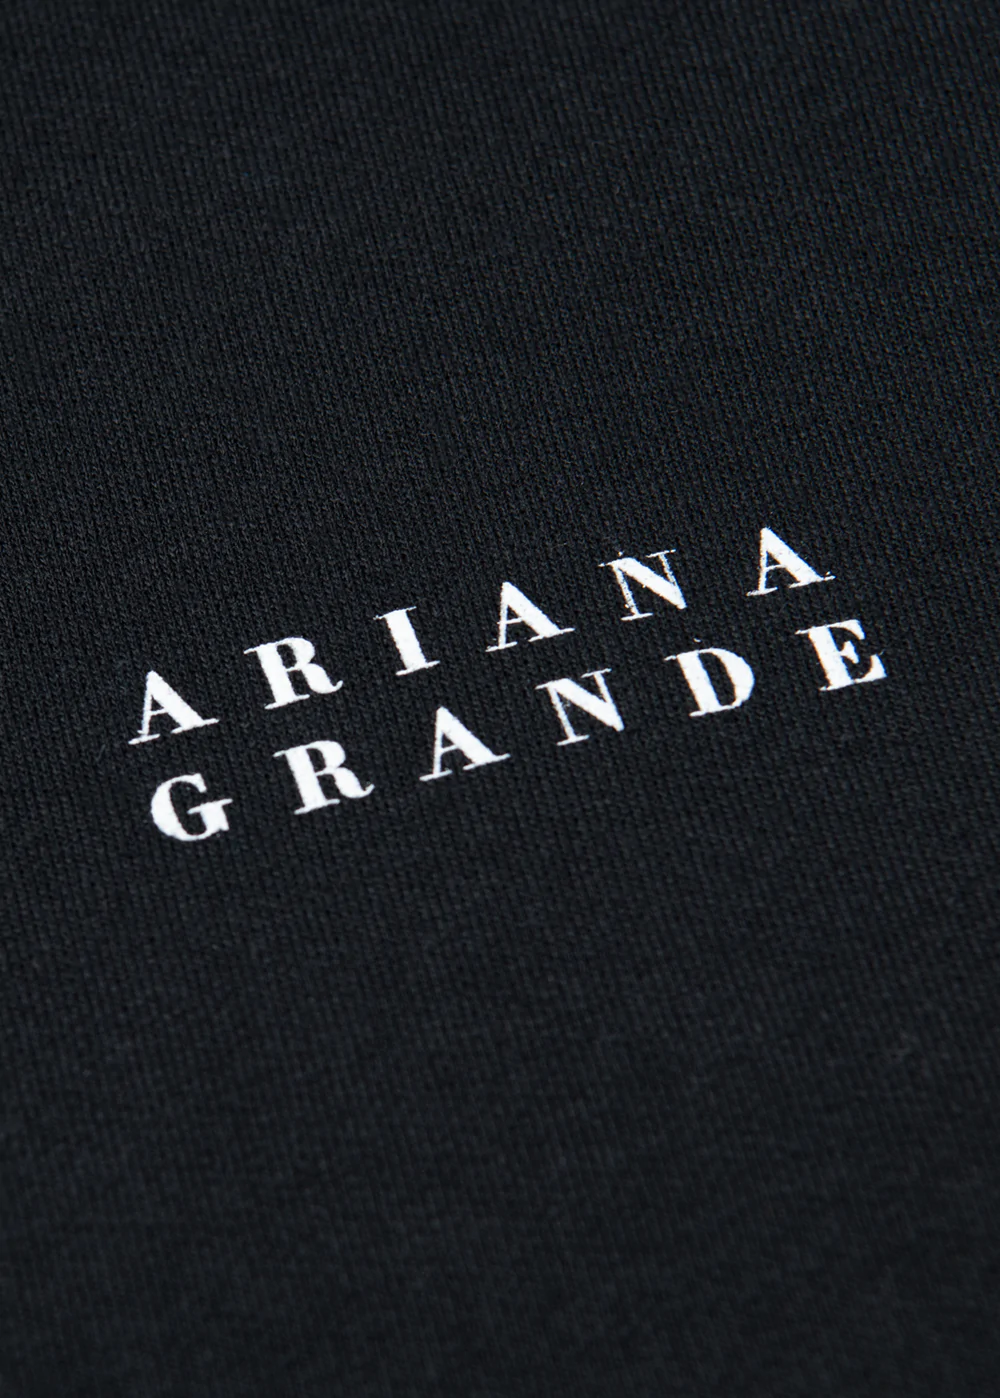 Ariana Grande - My Everything Cover Hoodie